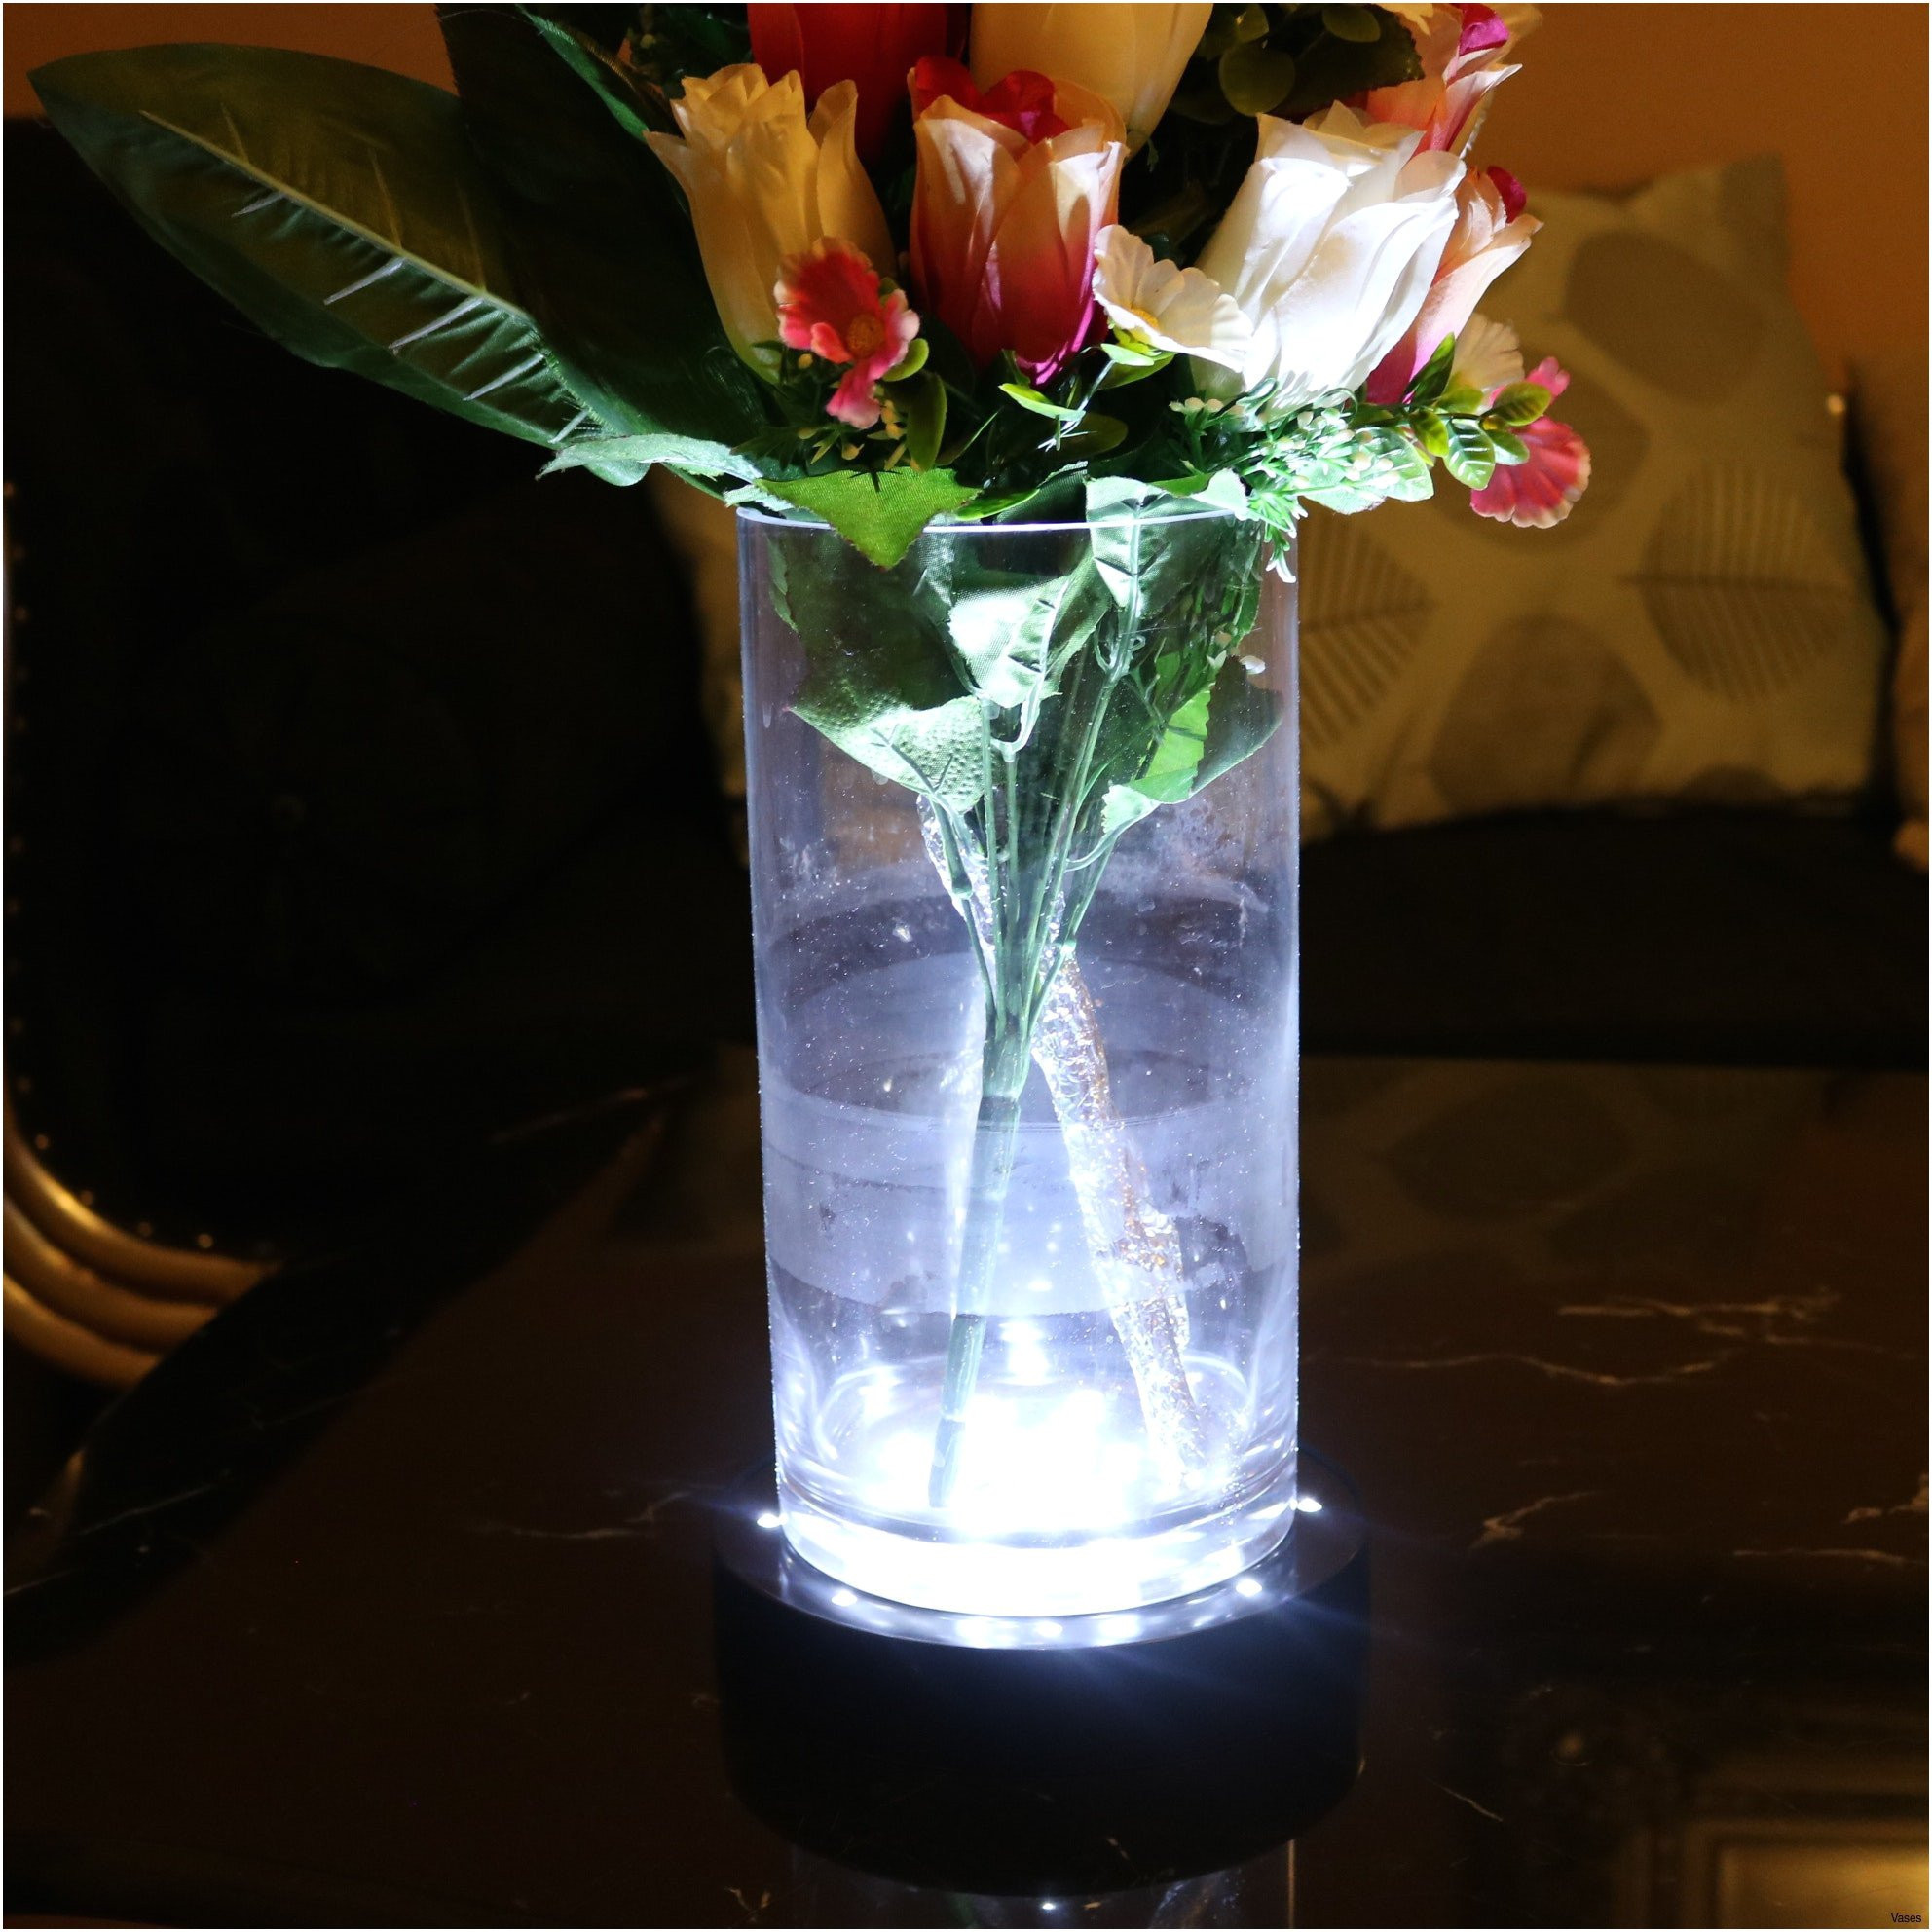 star shaped vase of stock of single flower vase vases artificial plants collection regarding single flower vase pics wedding flowers excellent vases disposable plastic single cheap of stock of single